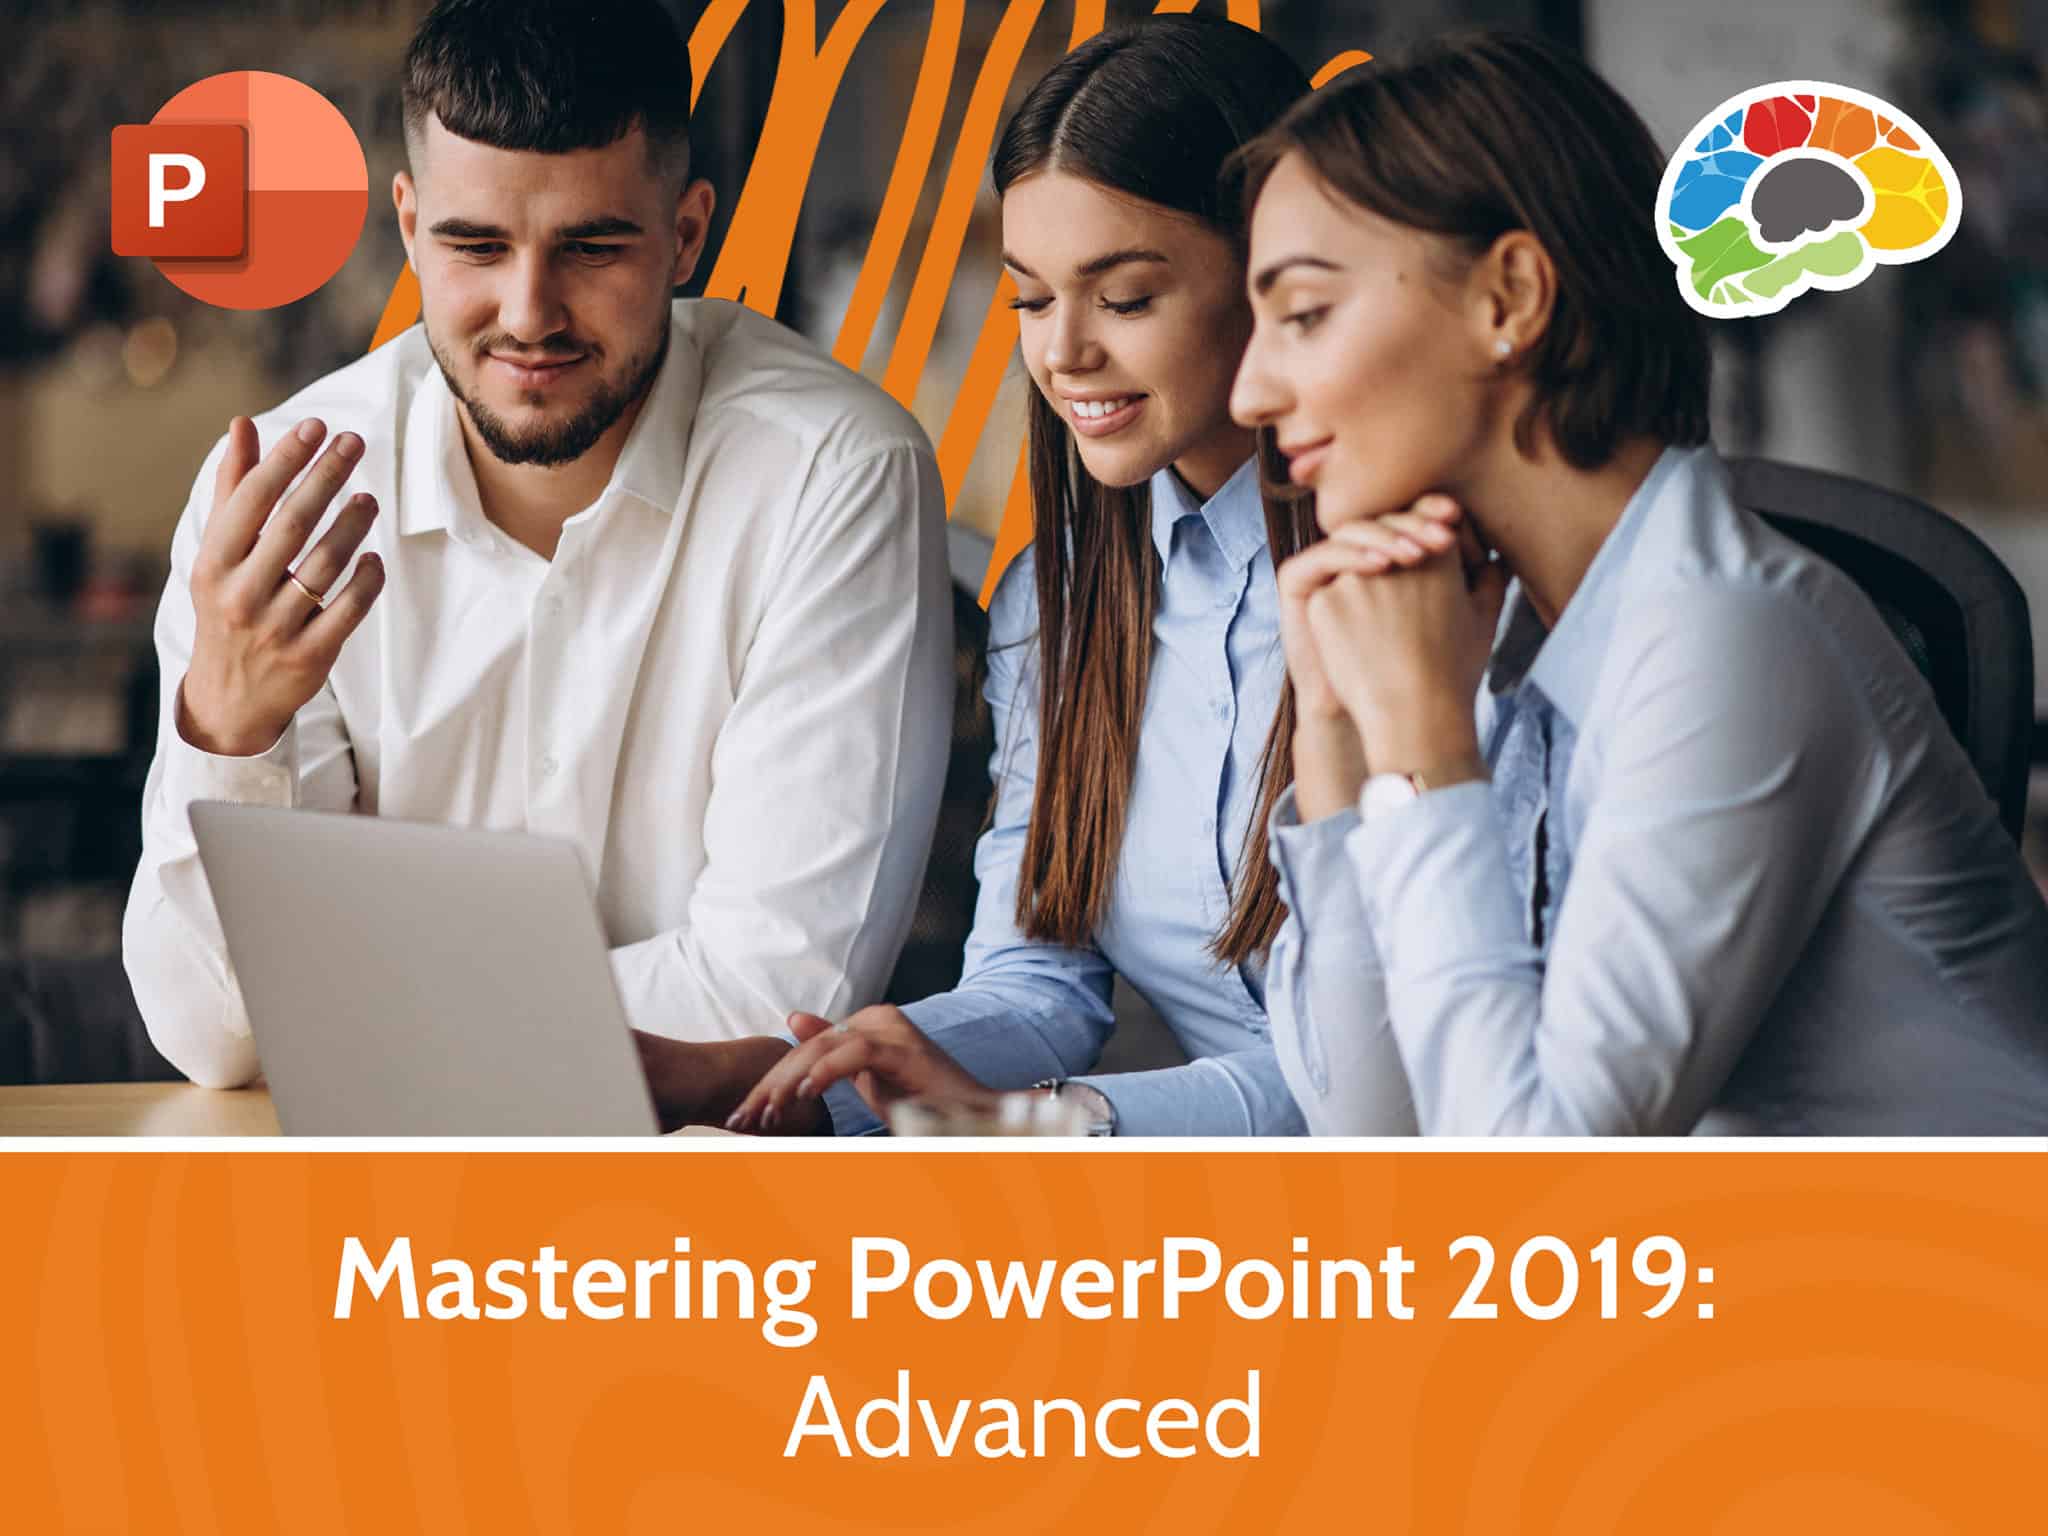 Mastering PowerPoint 2019 – Advanced scaled